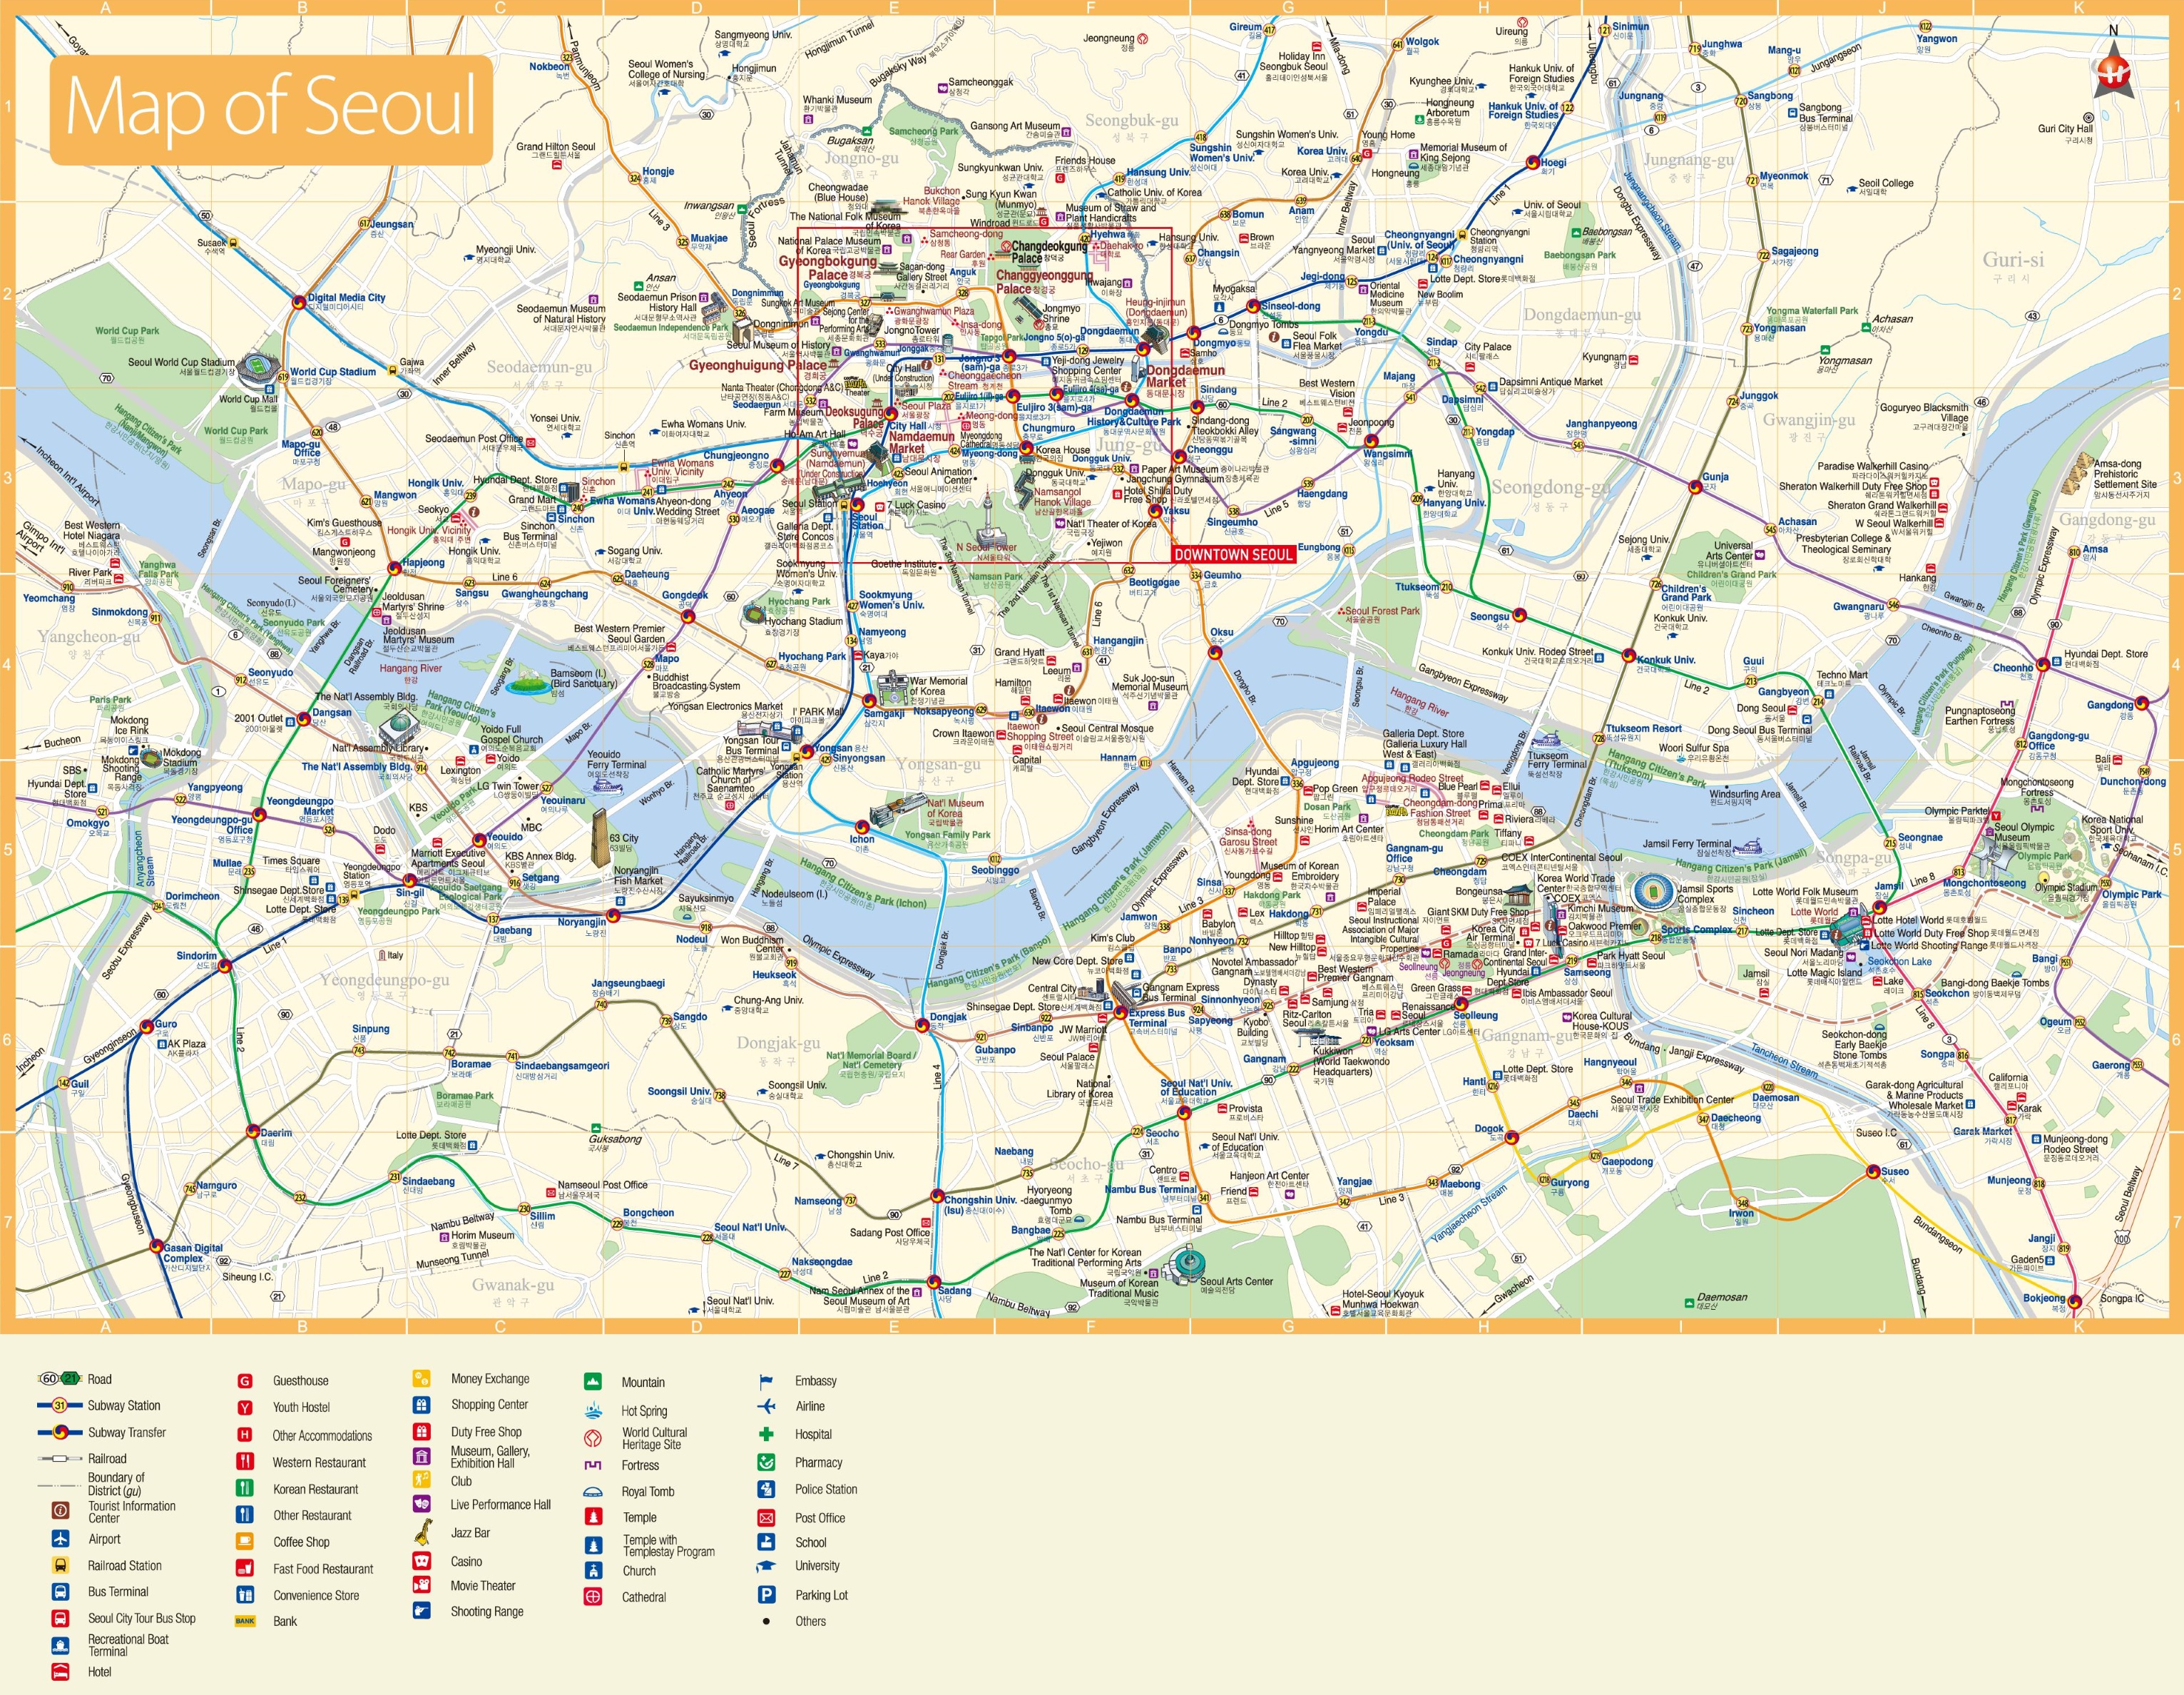 seoul-tourist-attractions-map.jpg (3062×2376)